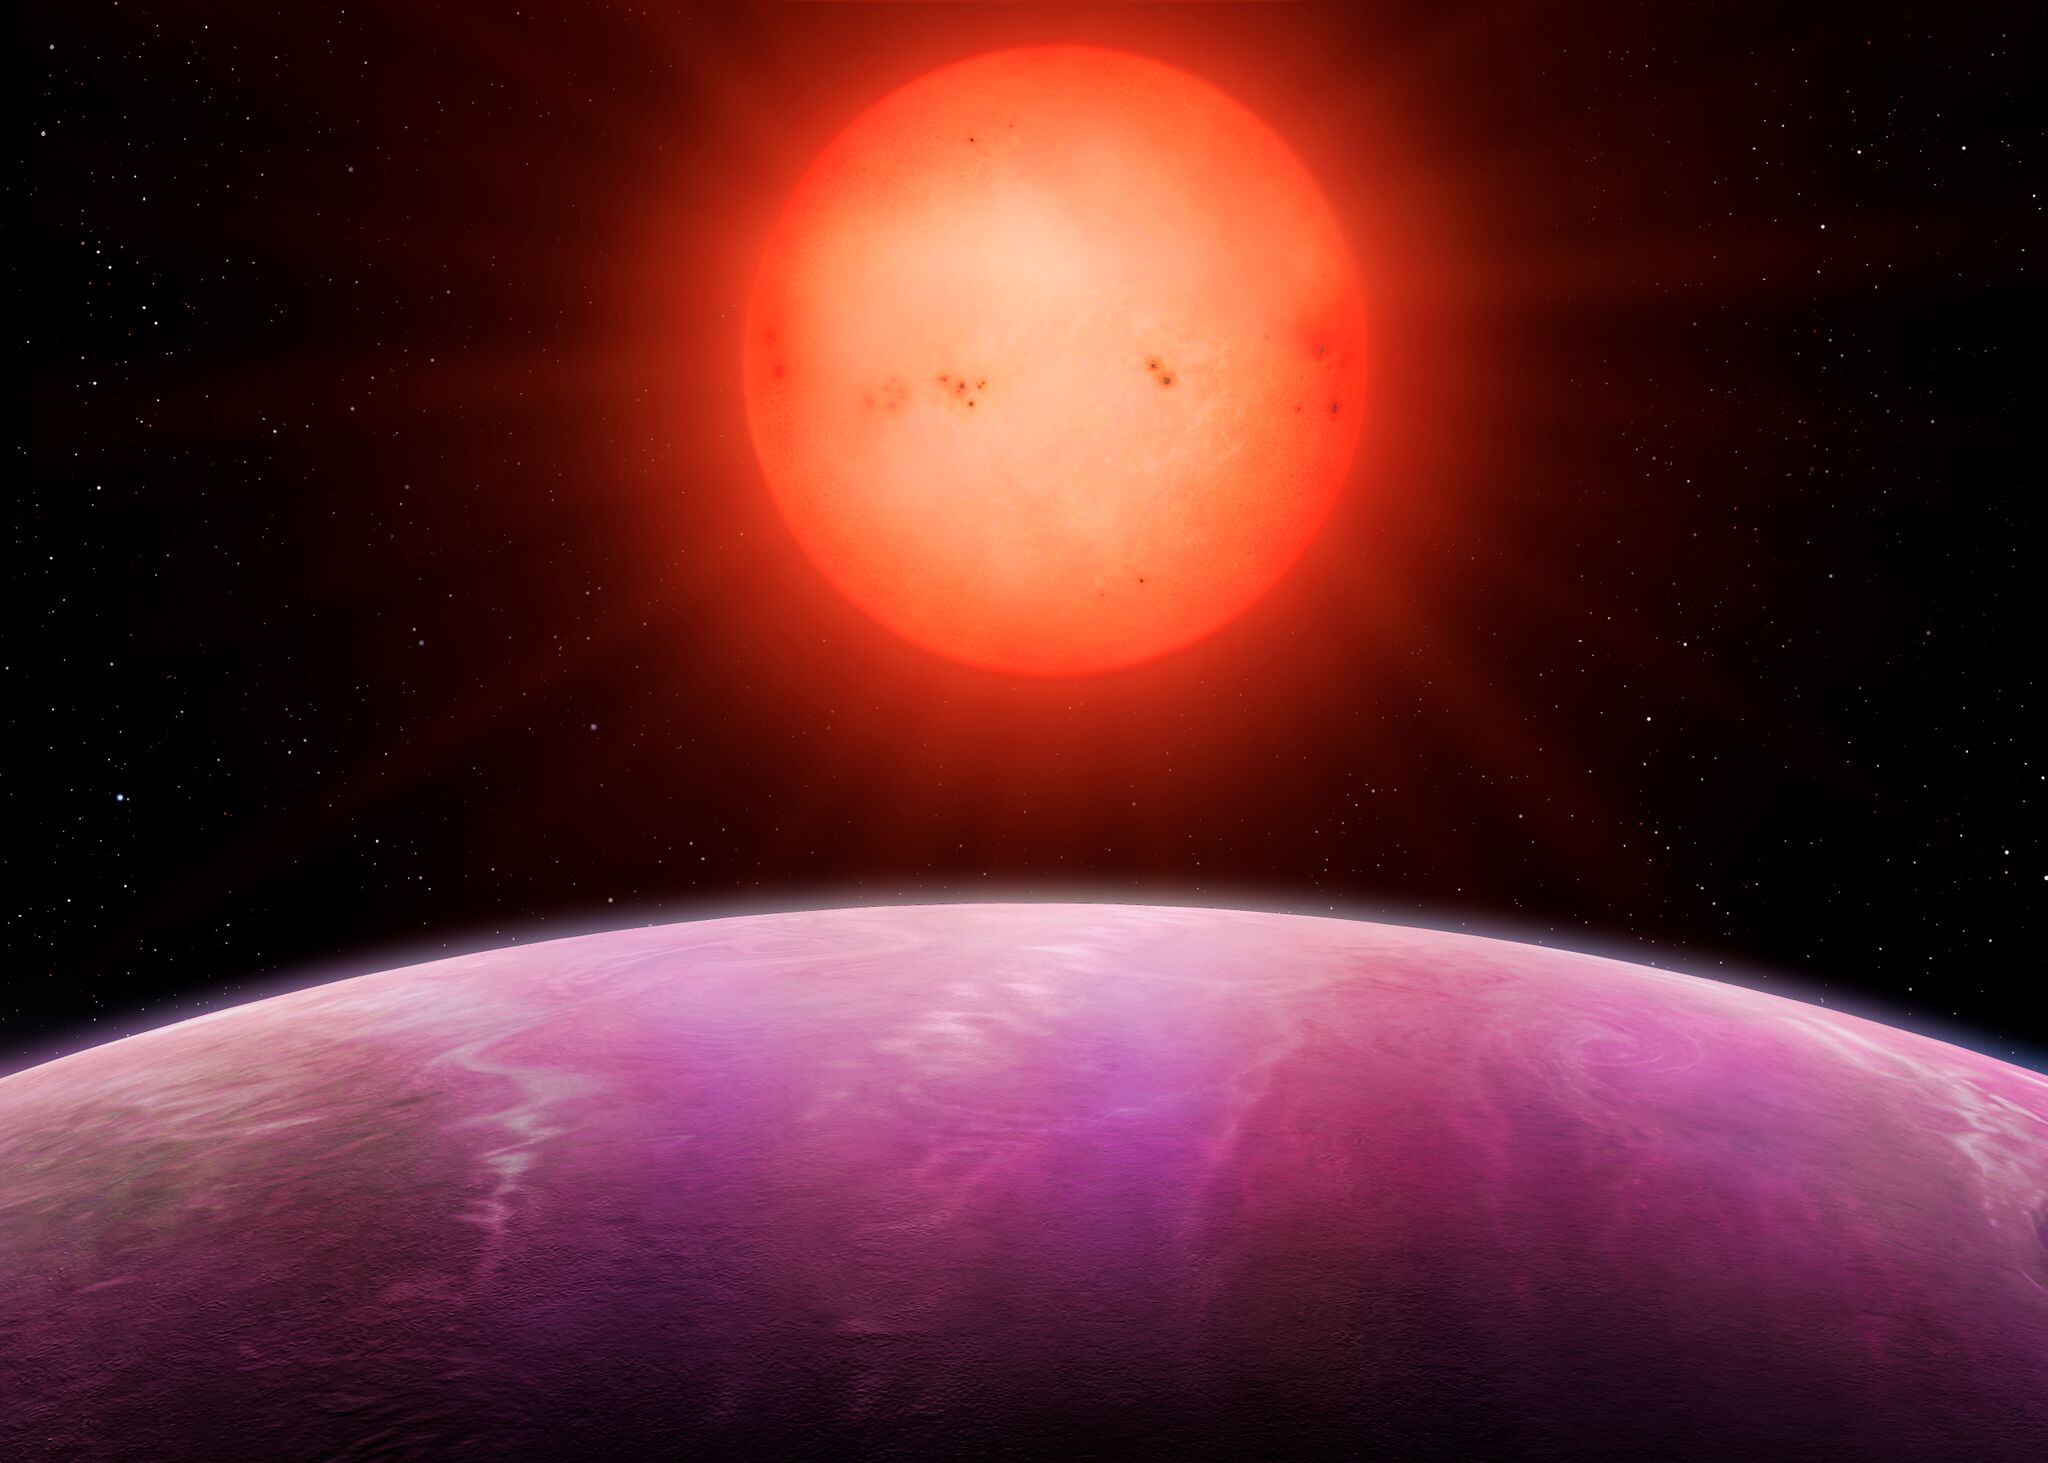 The first exoplanet dicovered by NGTS surprised astronomers